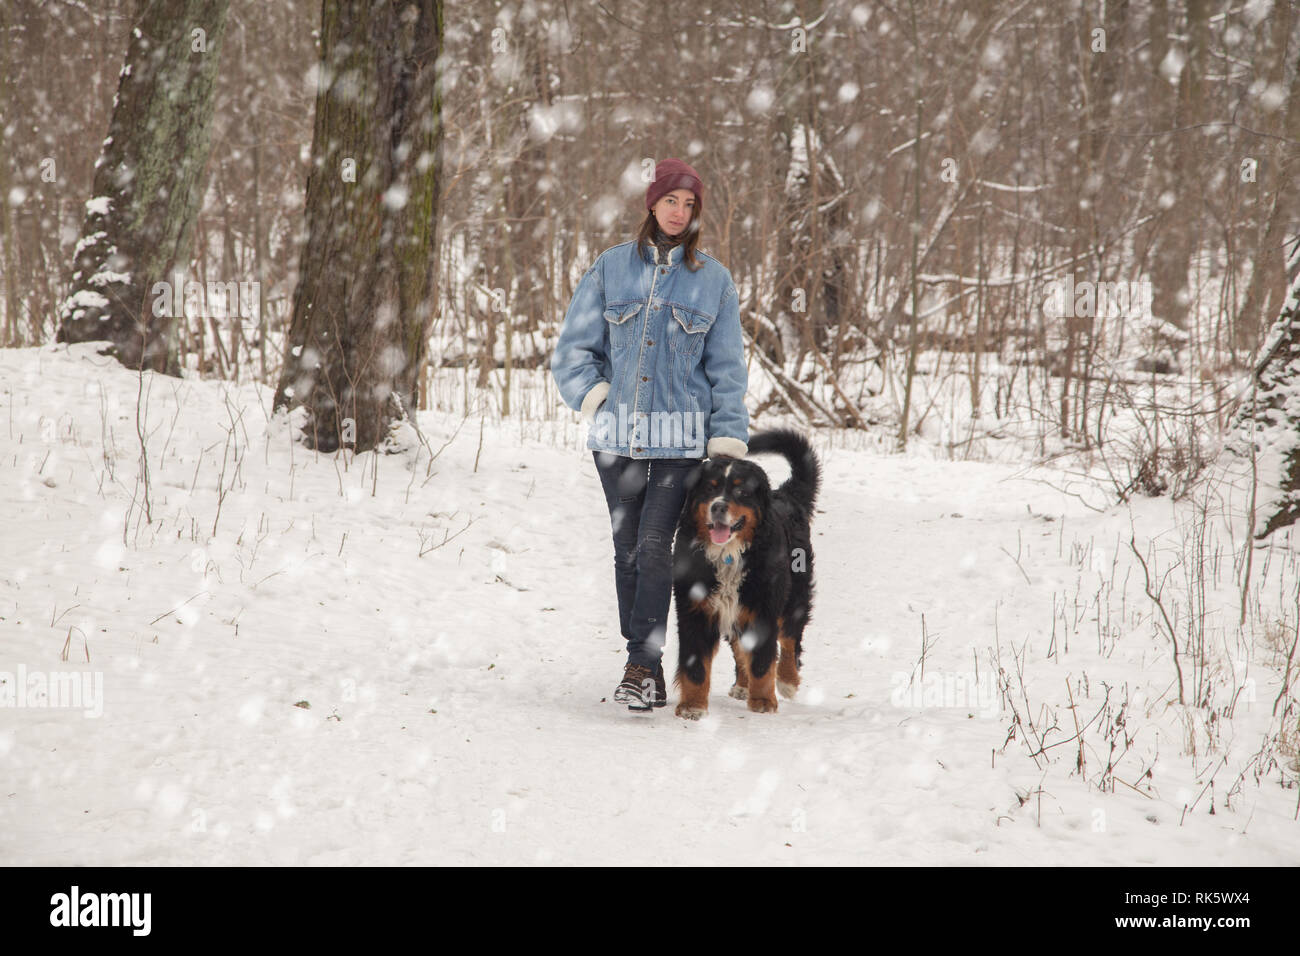 young woman in winter forest with bernese mountain dog walking under falling snow Stock Photo